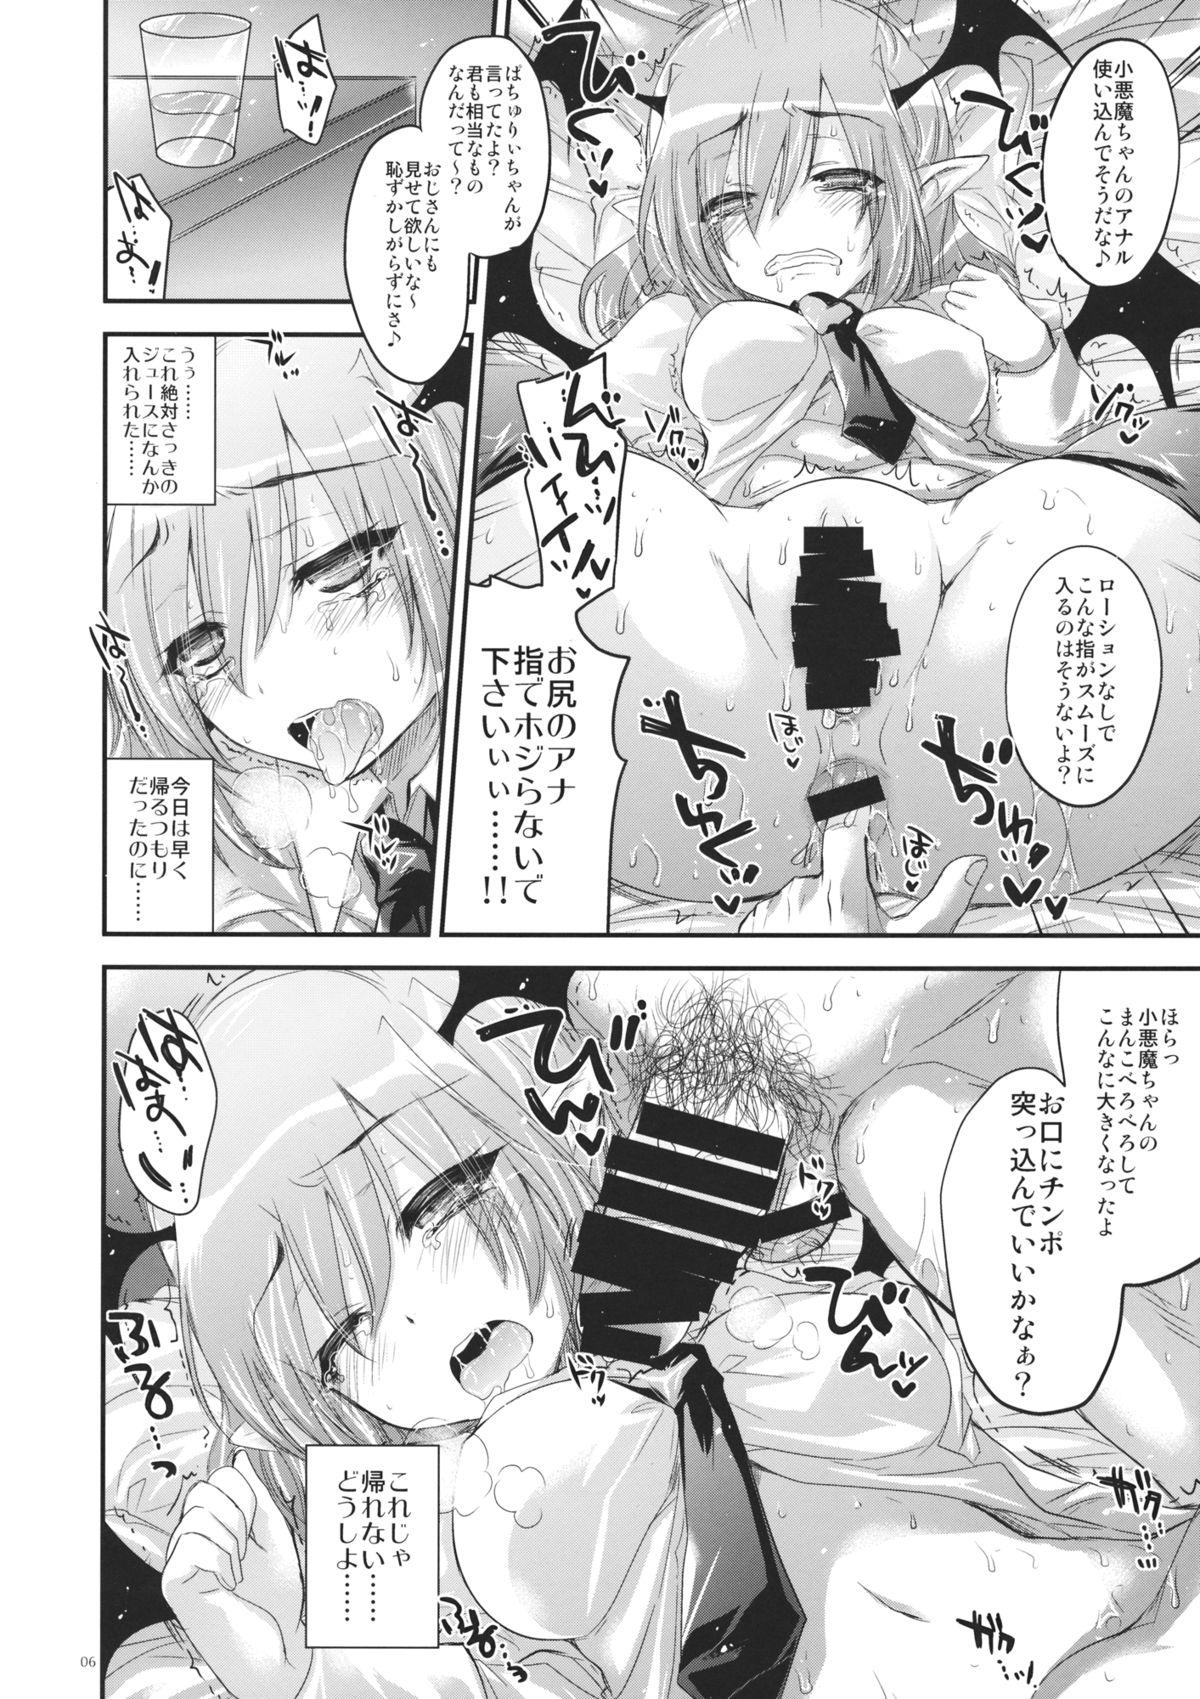 Tanned GARIGARI 57 - Touhou project 18 Porn - Page 5